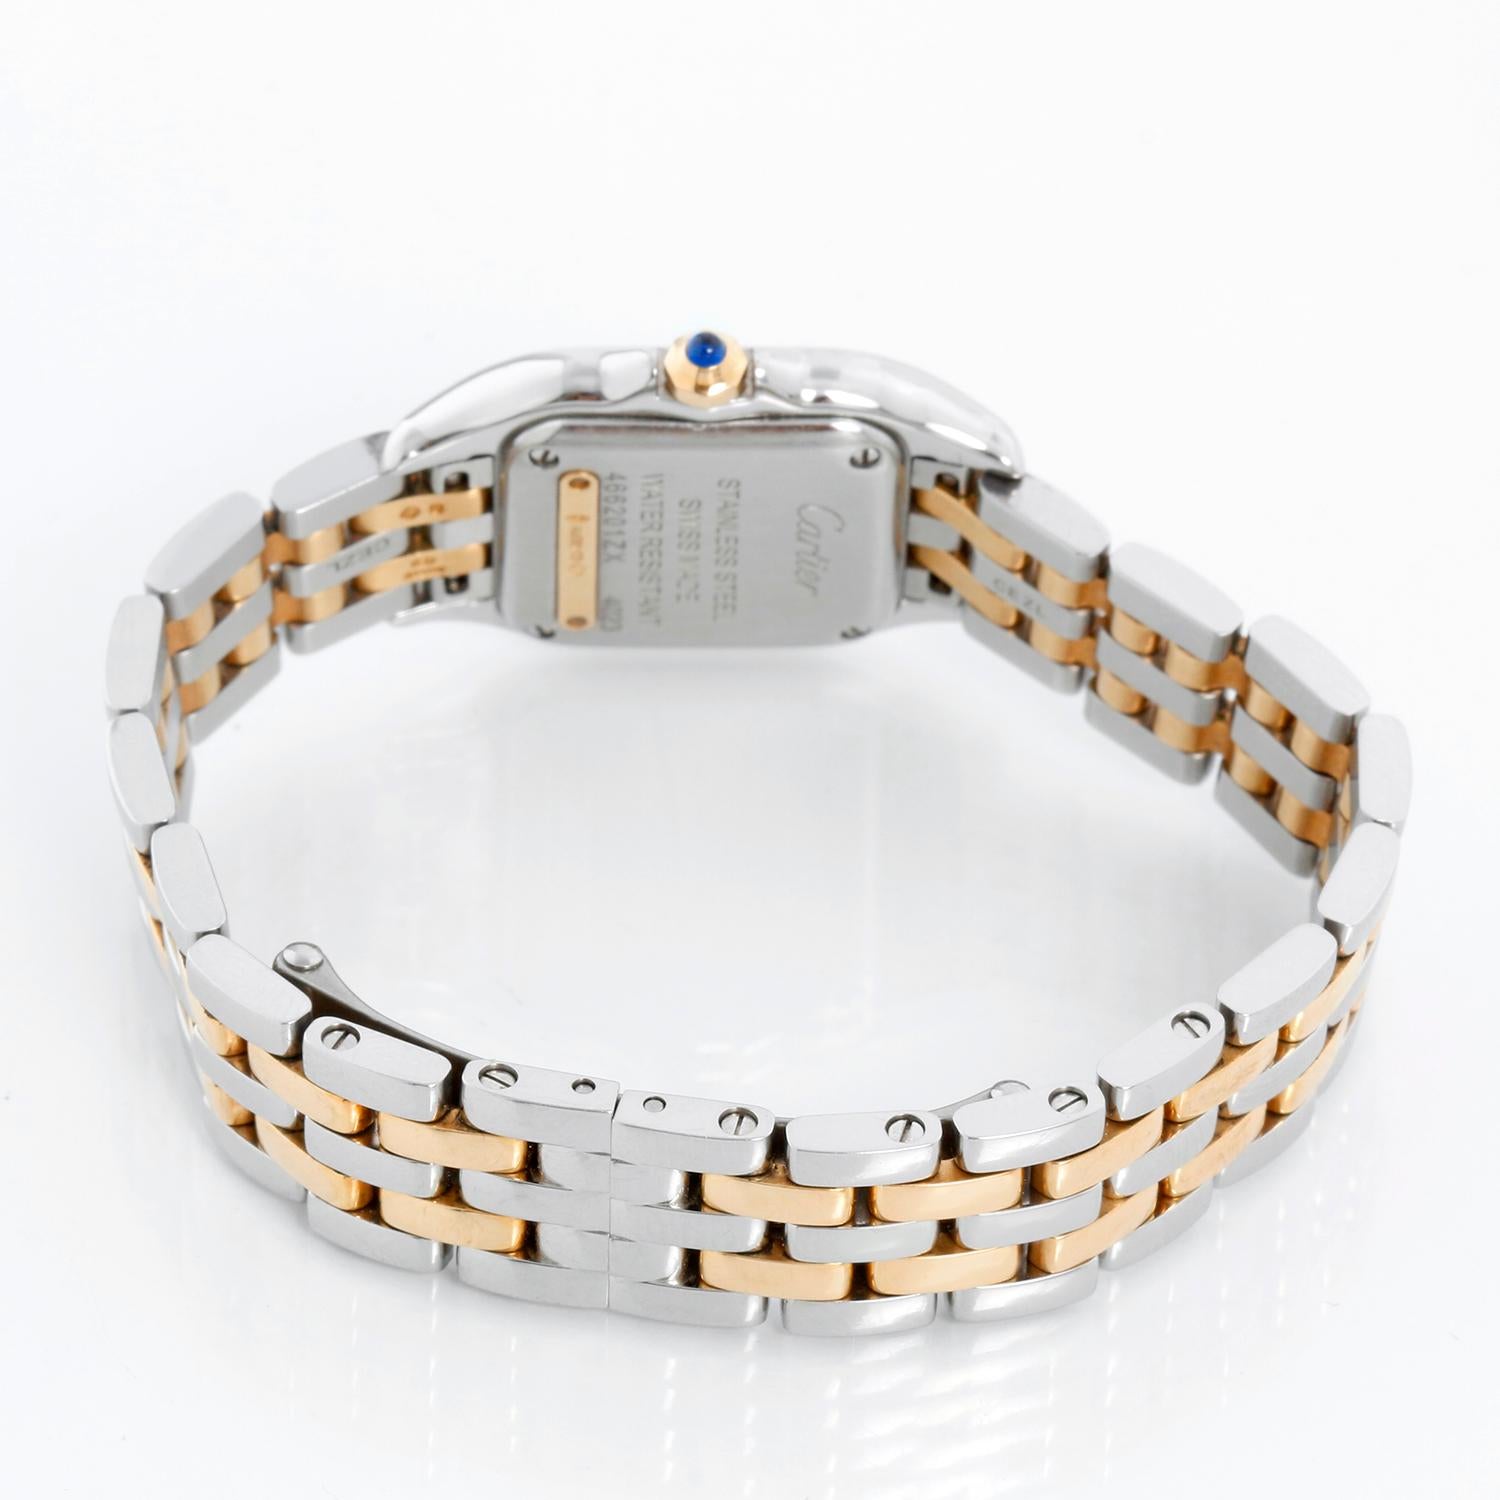 Women's Cartier Panther Small 2-Tone Steel & Gold Panthere Watch 4023 W2PN0006 For Sale